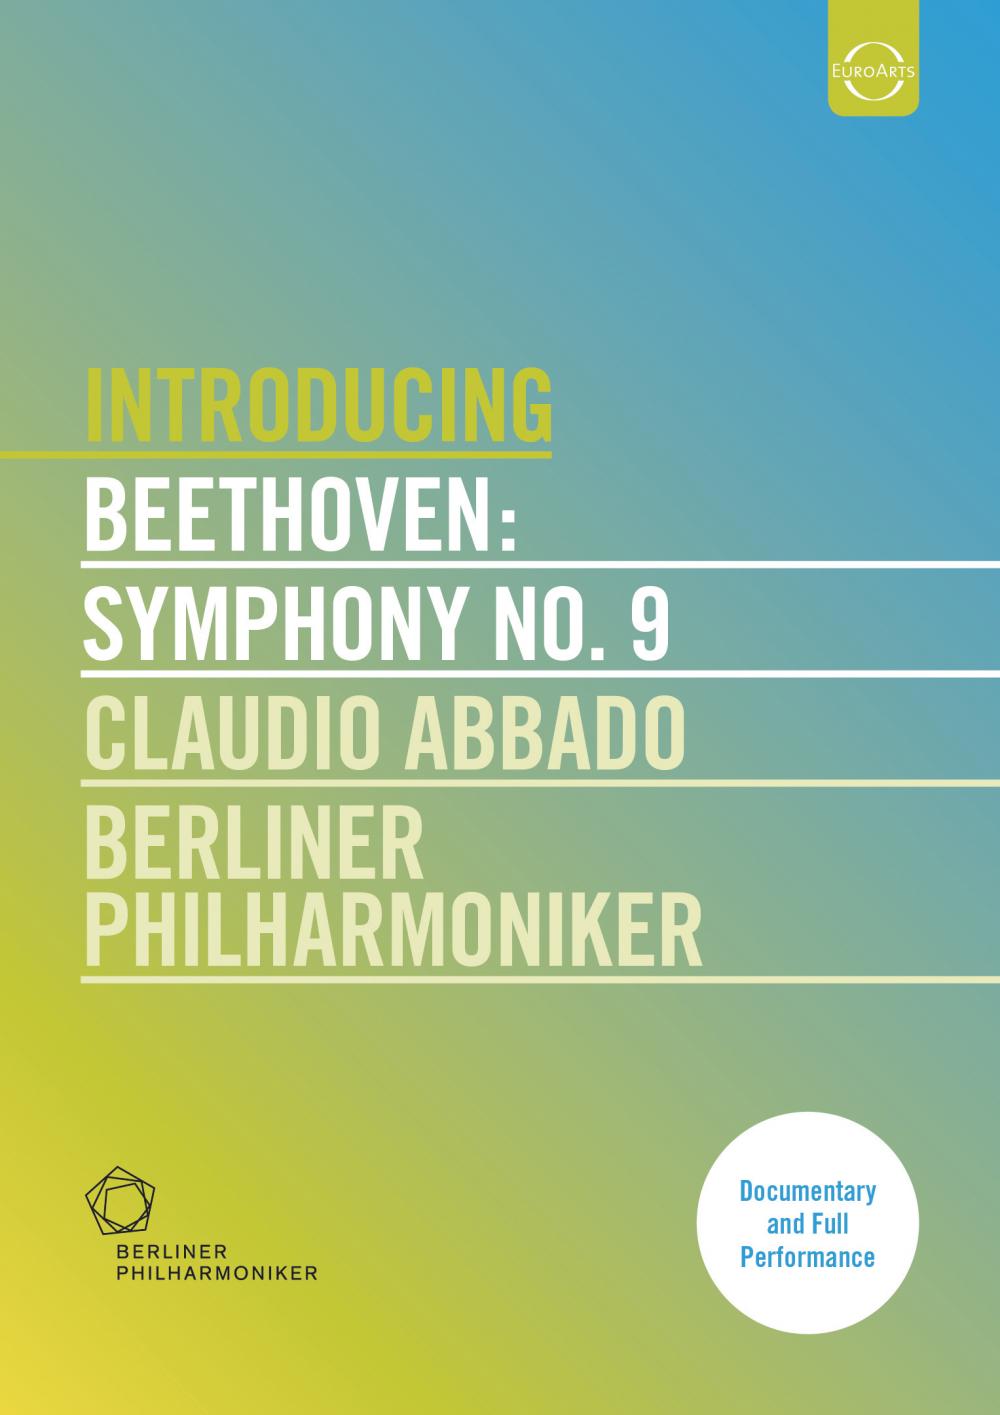 BEETHOVEN: Introducing Beethoven's Symphony No. 9 - Abbado, Berlin Philharmonic (Documentary and Full Performance on DVD)